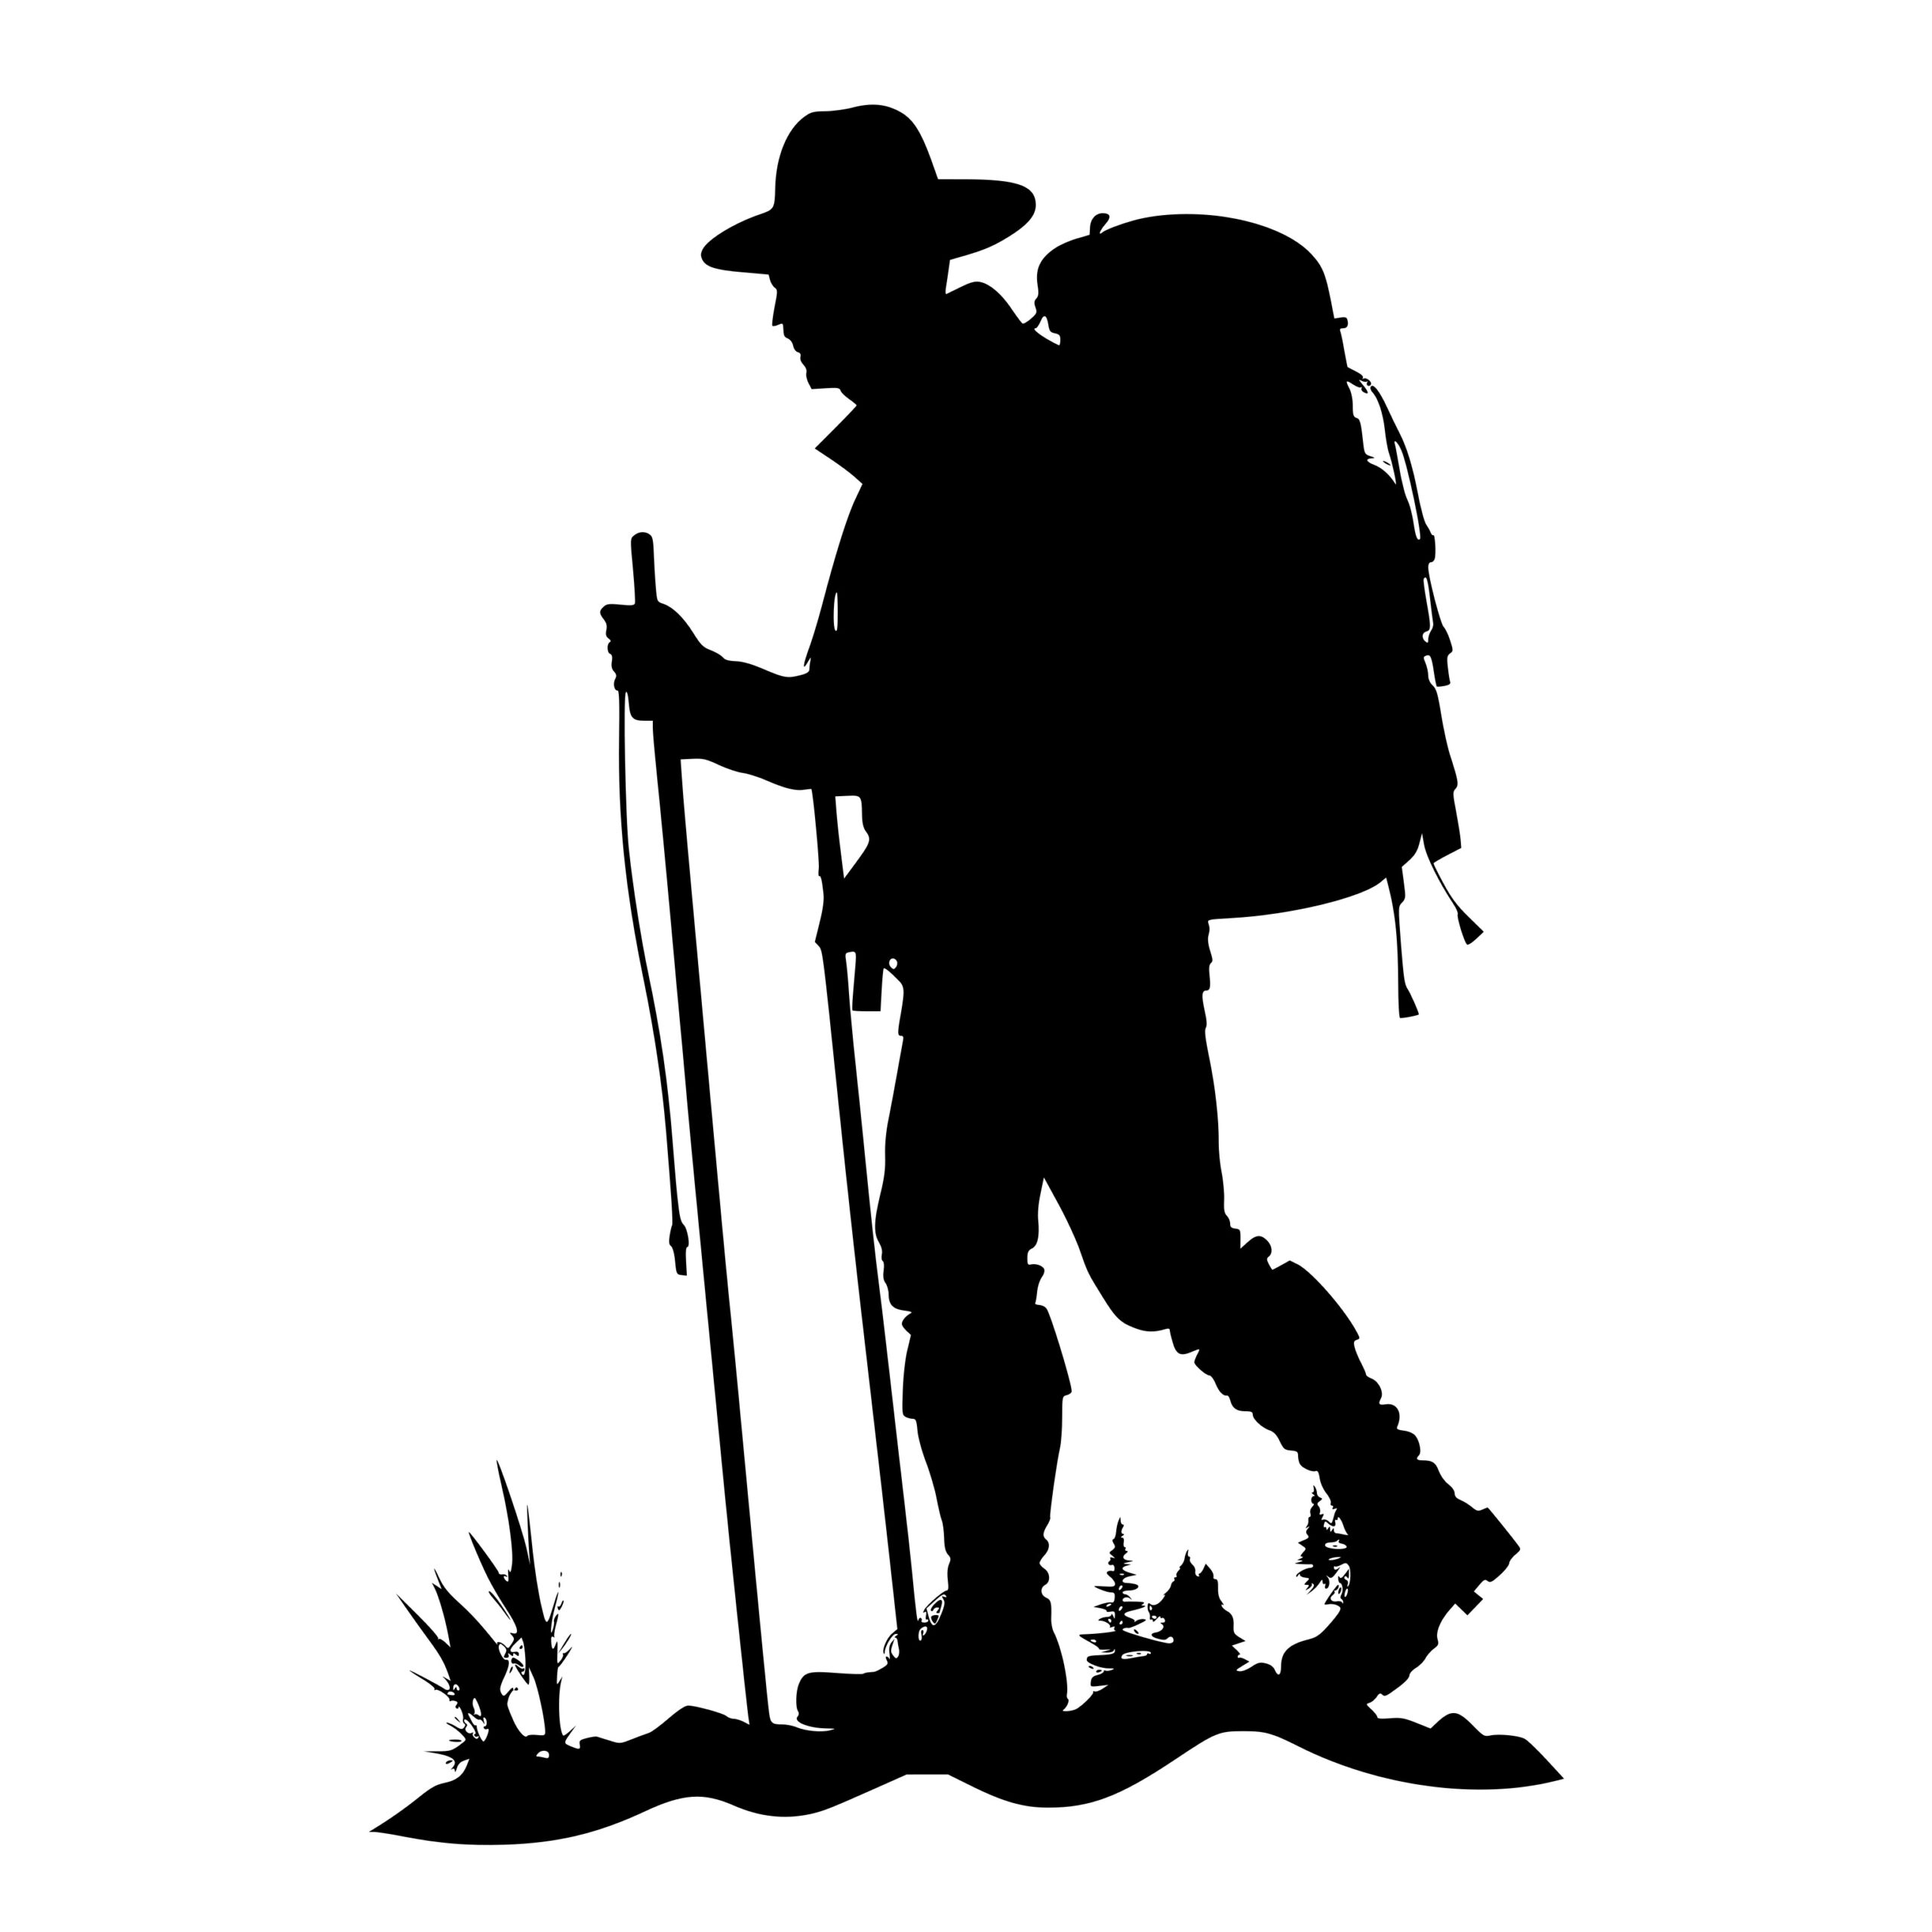 Camping and Hiking SVG File for Cricut, Silhouette, and Laser Machines